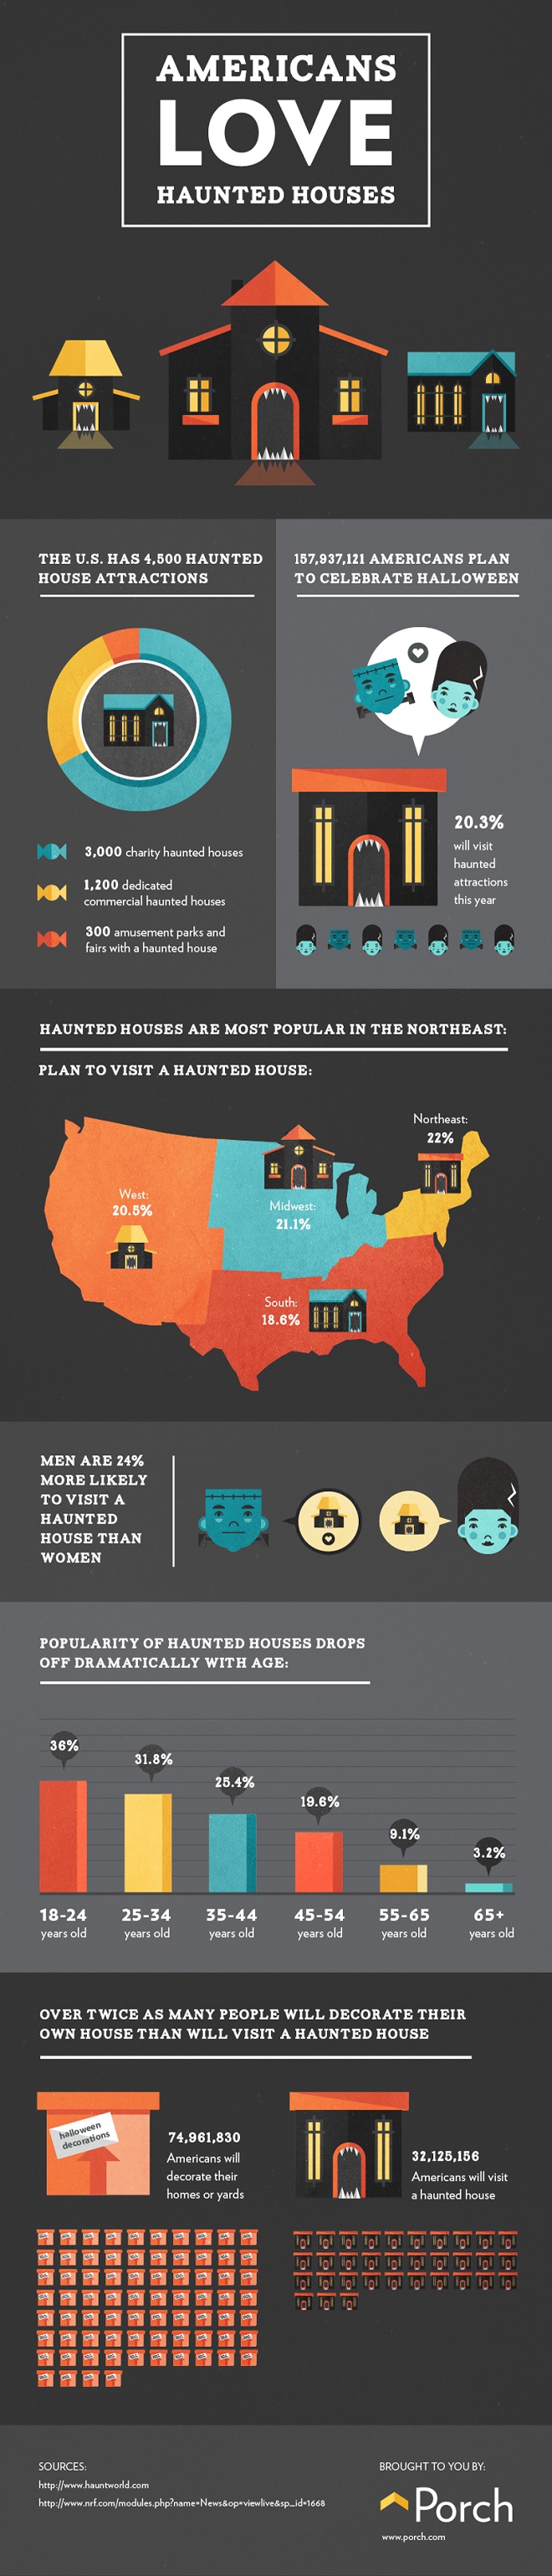 Americans Love Haunted Houses Infographic